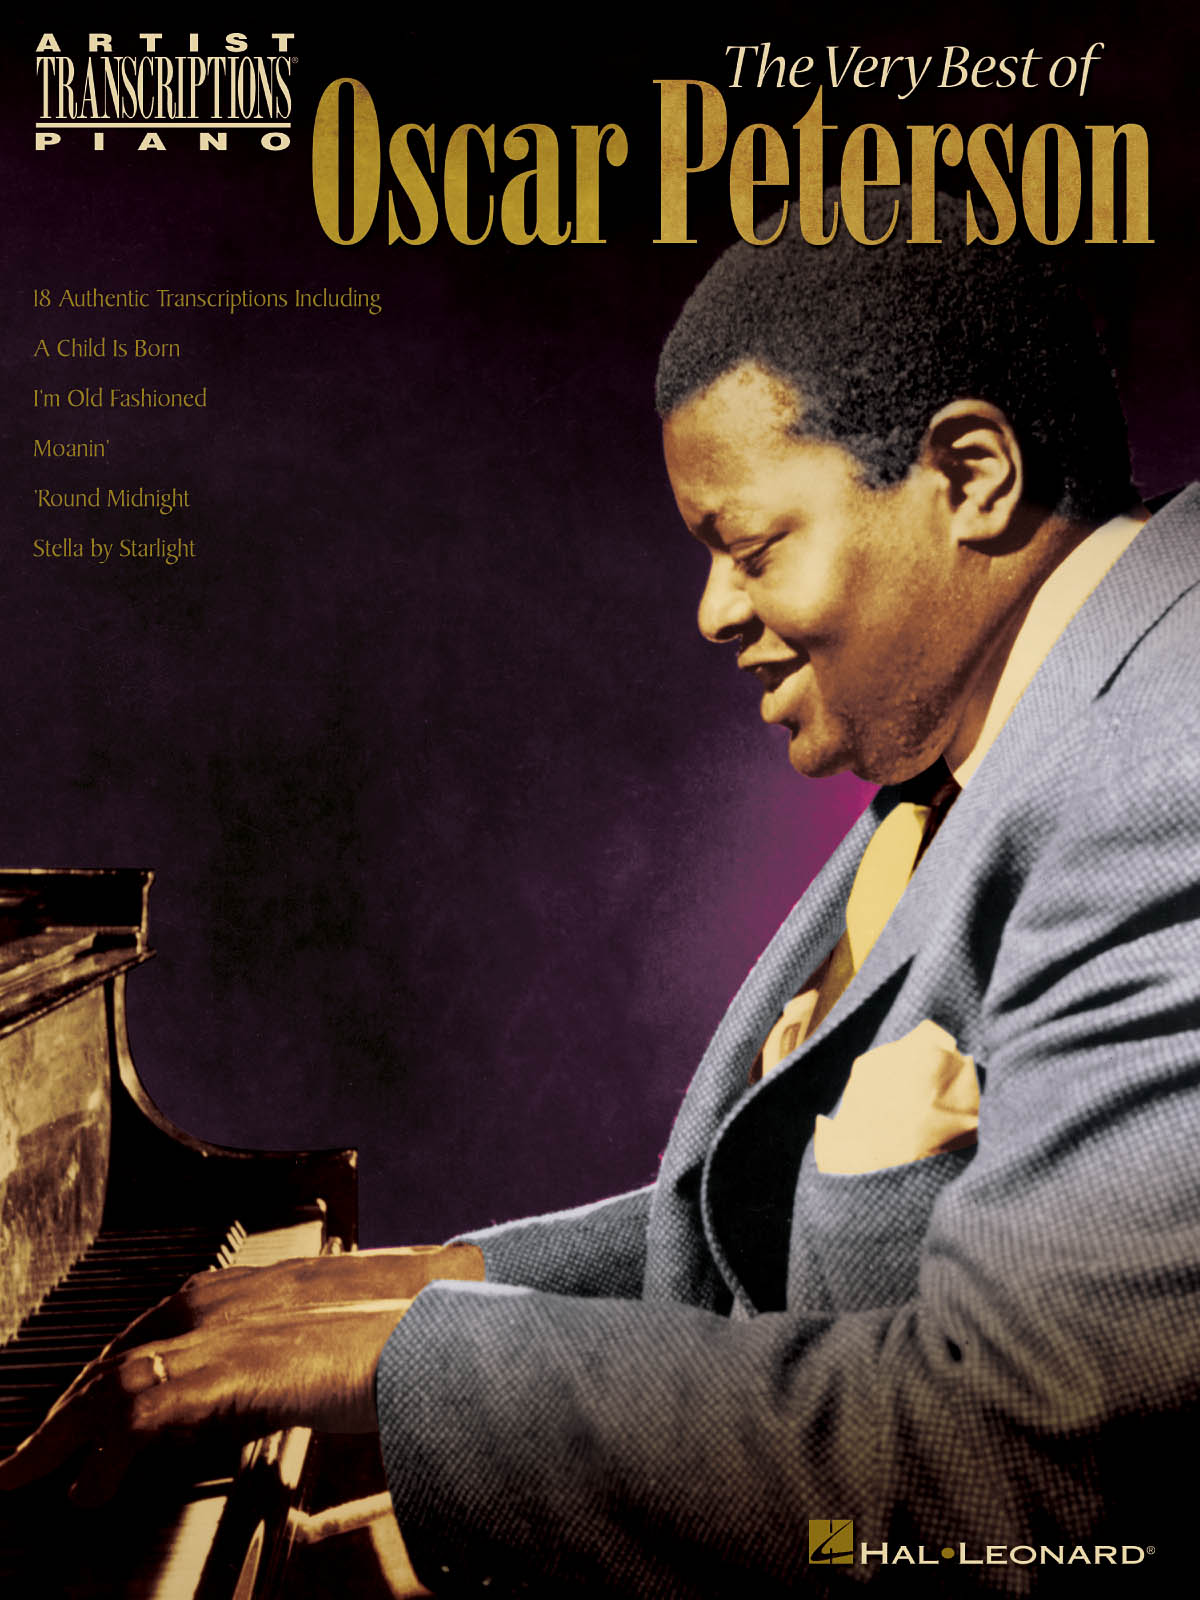 The Very Best of Oscar Peterson - 18 Authentic Transcriptions